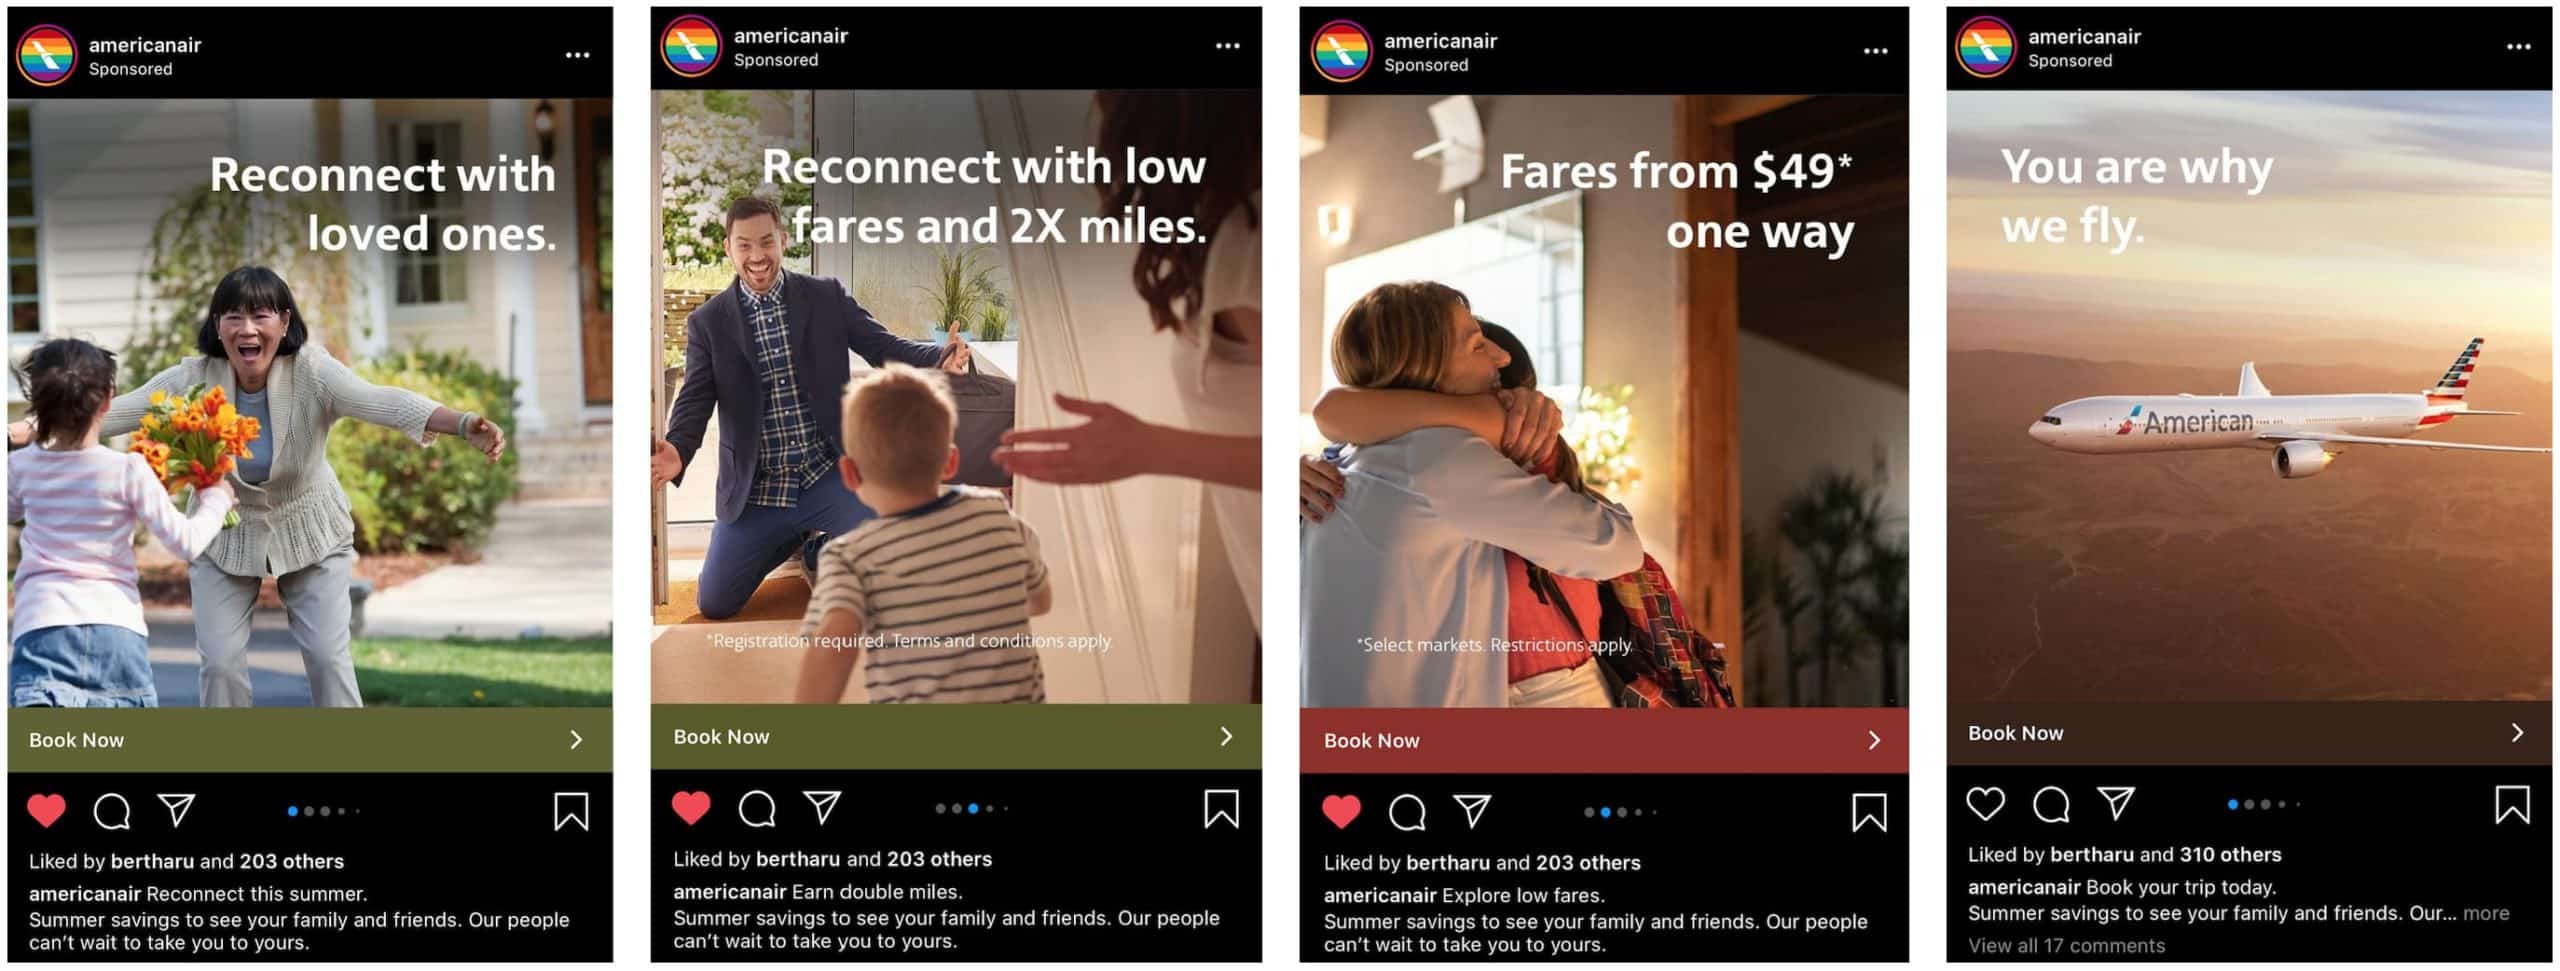 American Airlines Summer of deals instagram promotion